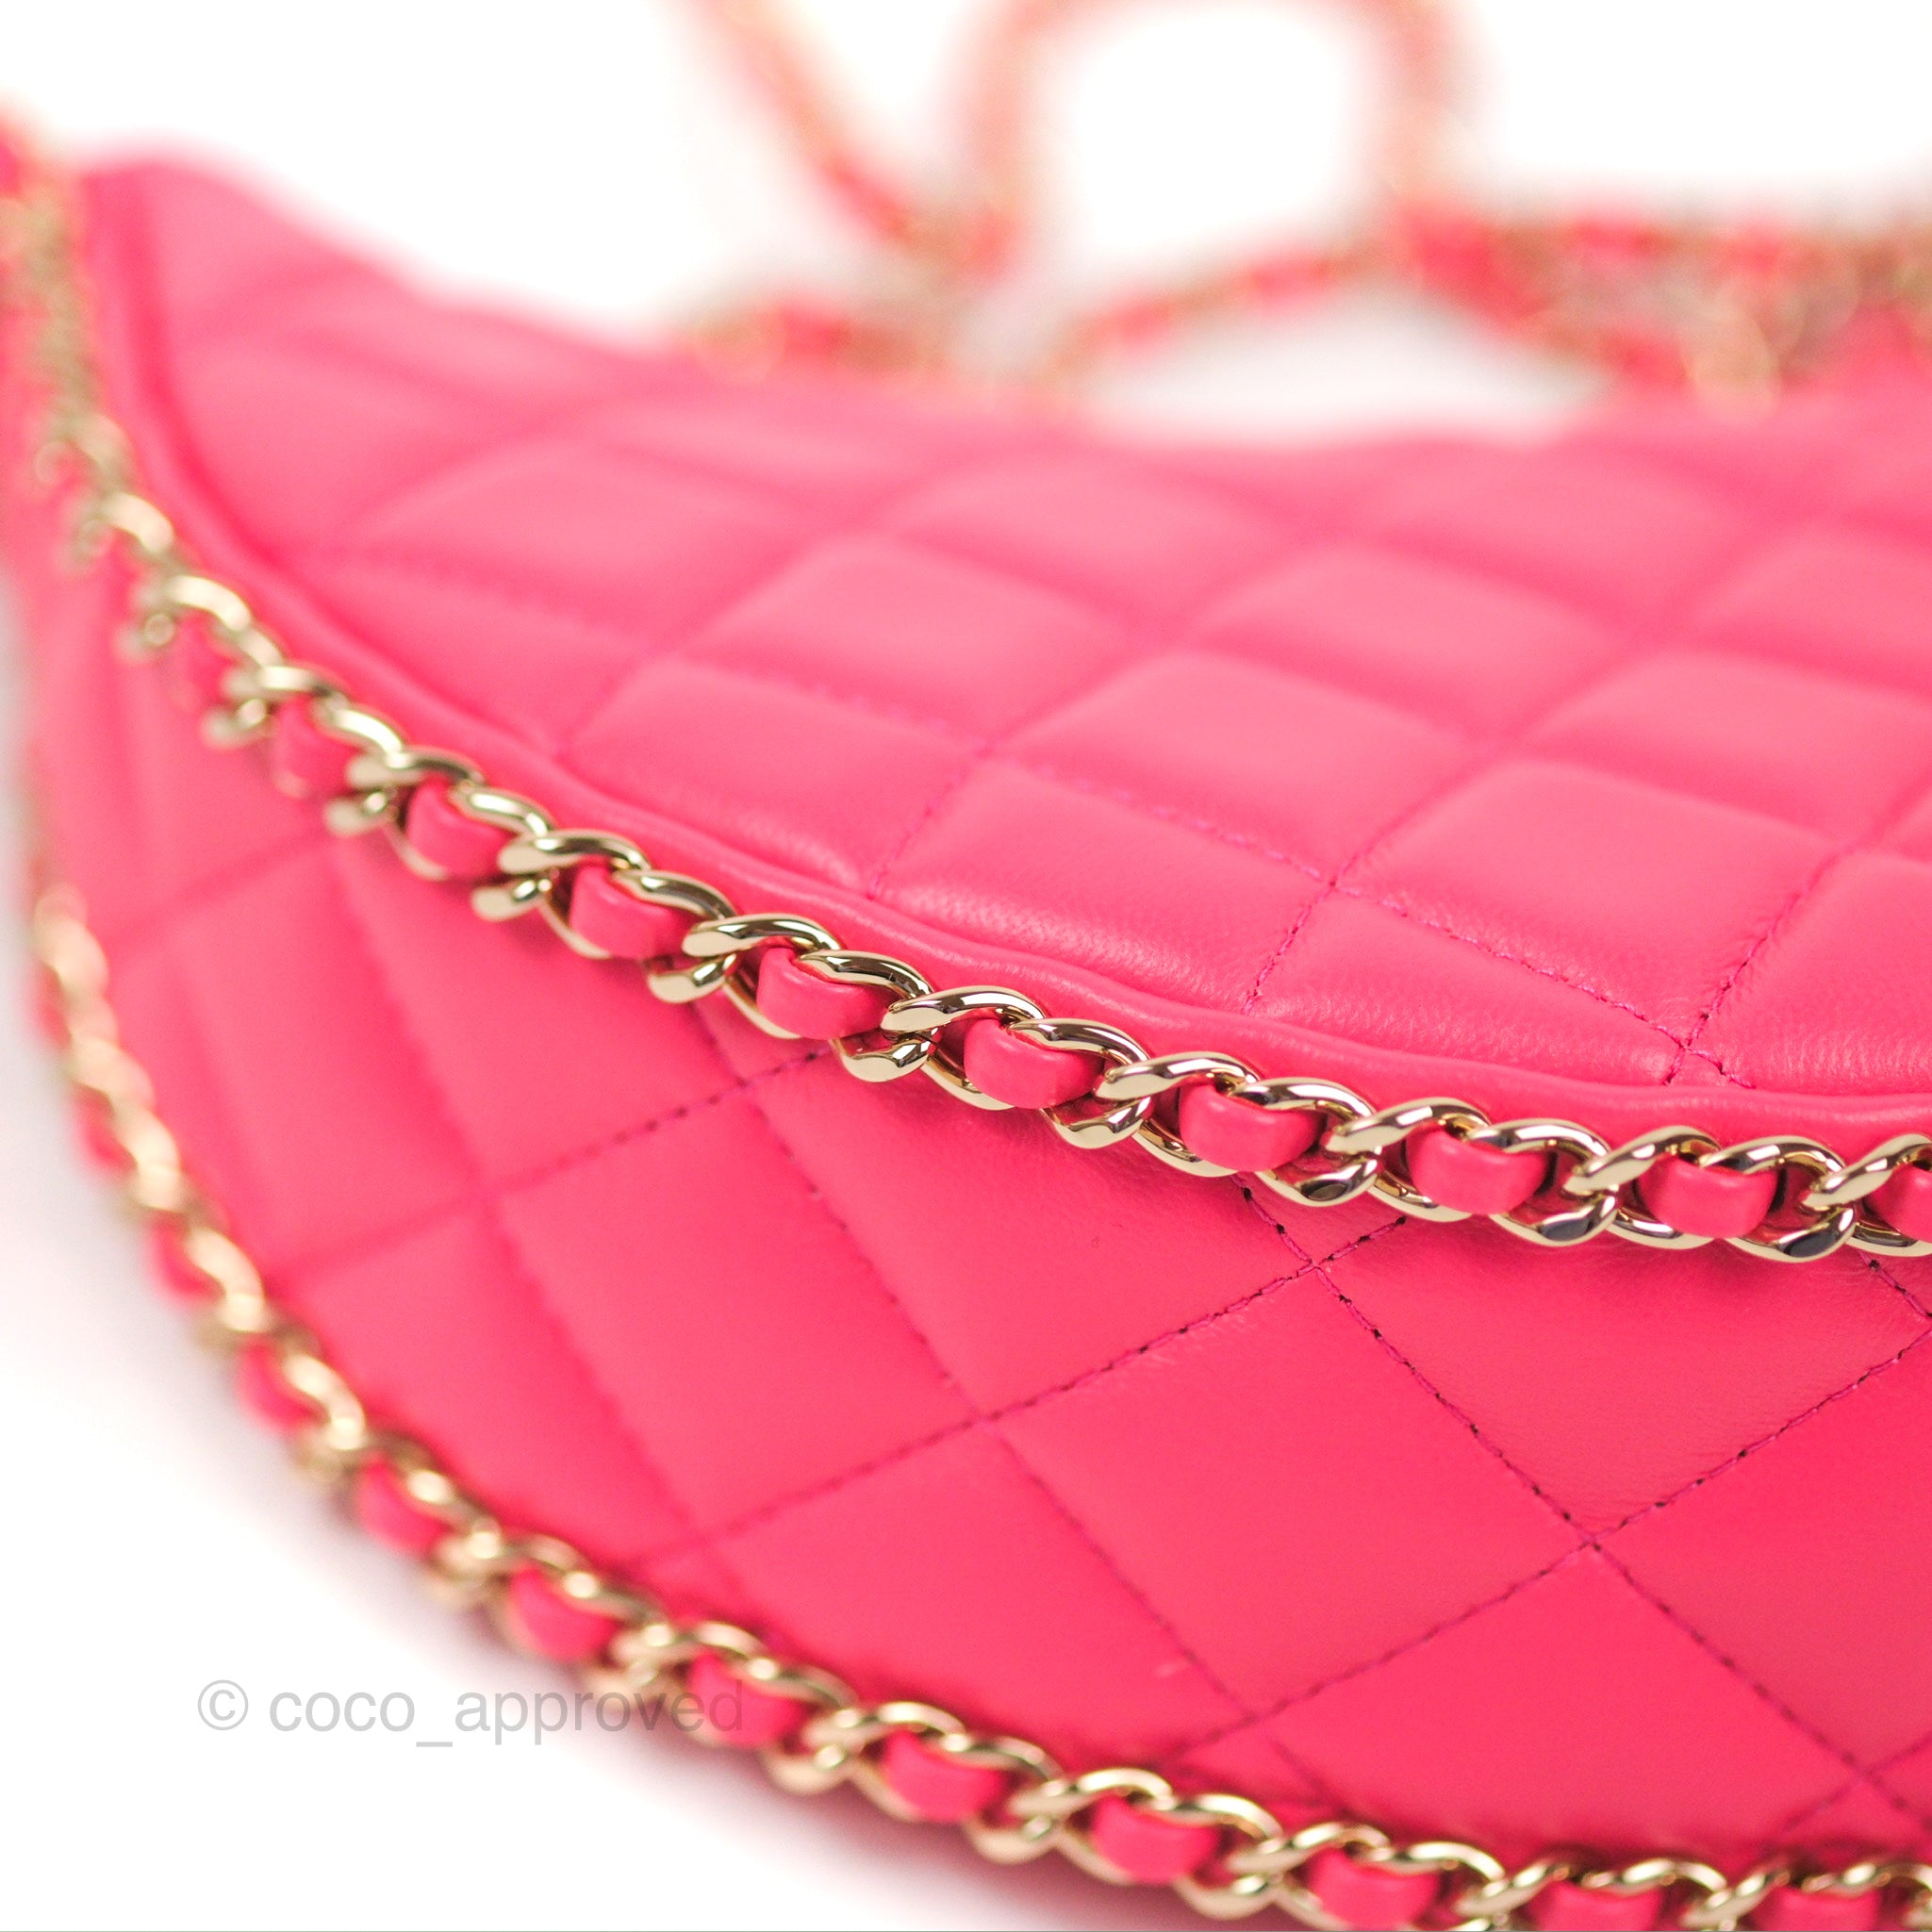 Chanel Small Hobo Bag AS3917 B10551 NM373 , Pink, One Size